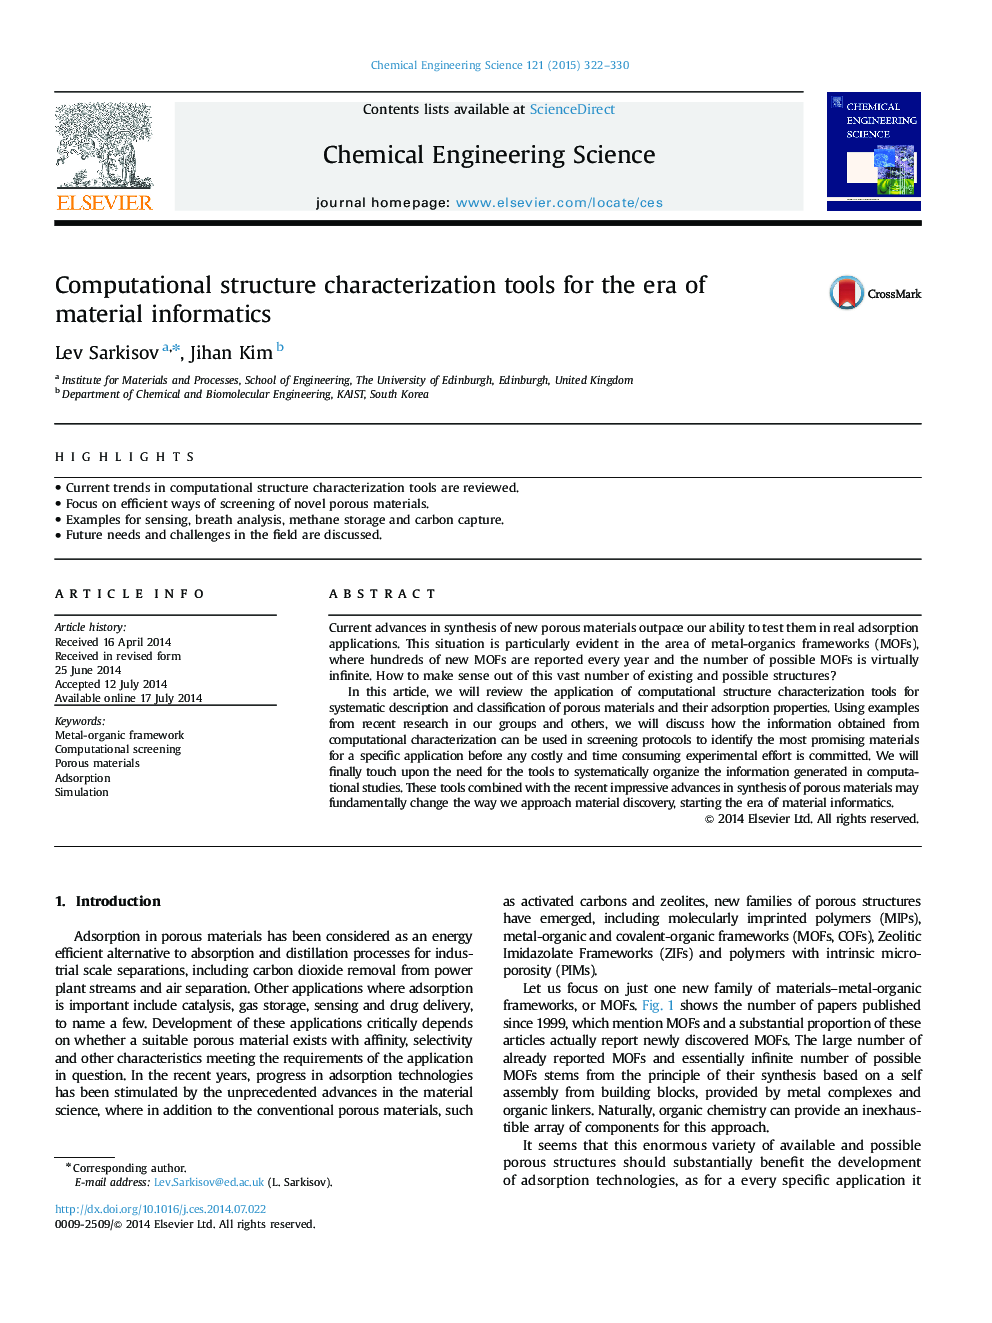 Computational structure characterization tools for the era of material informatics